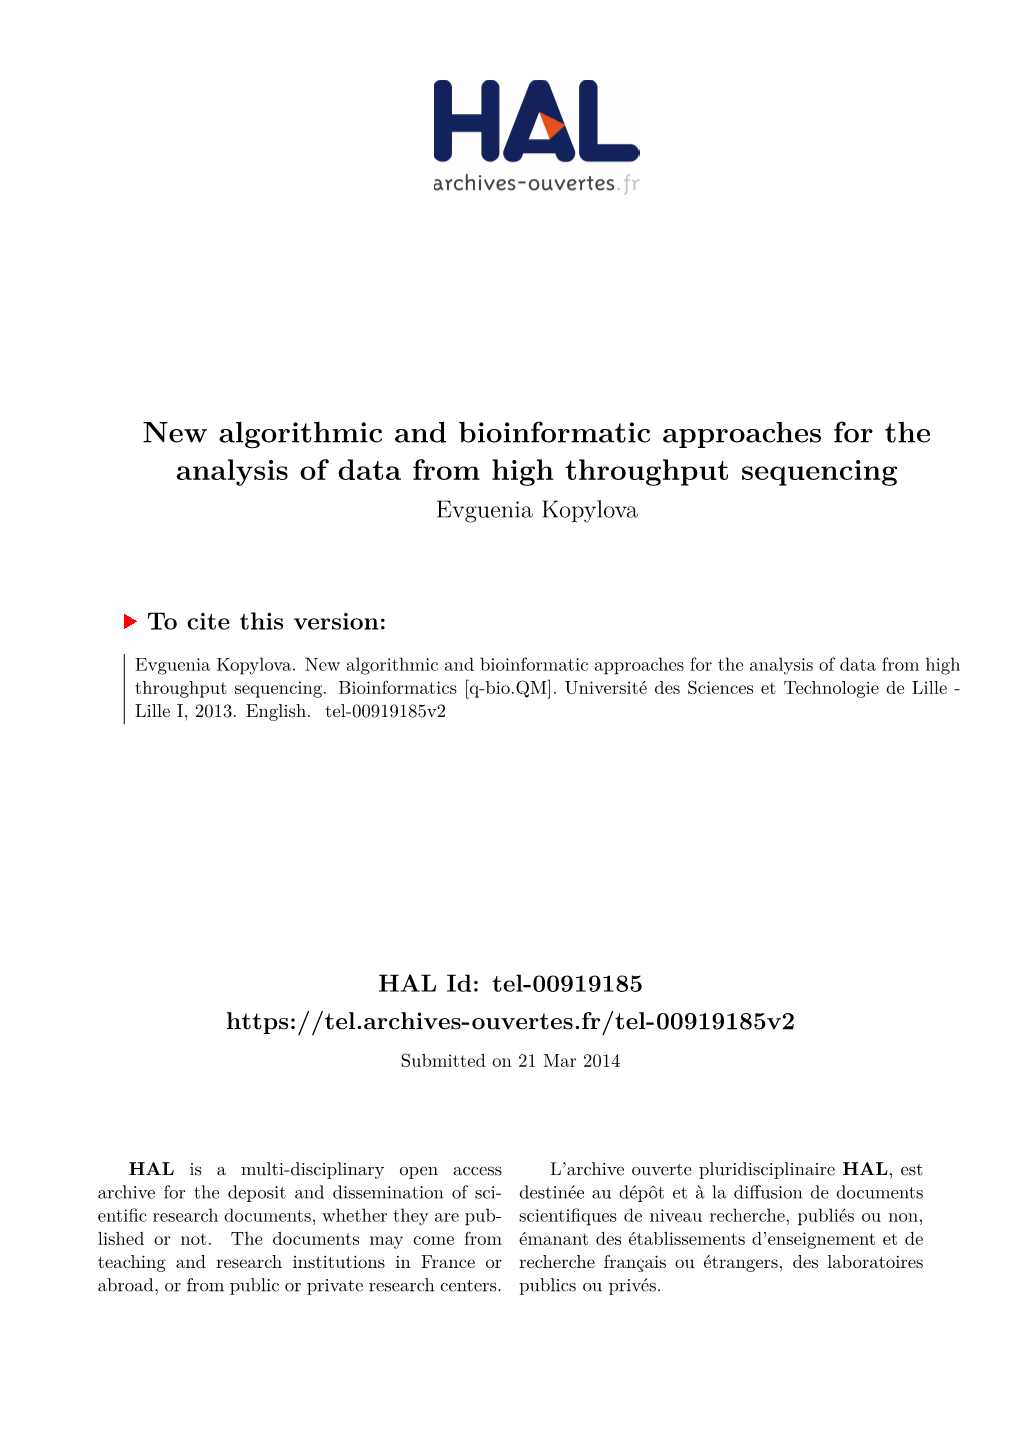 New Algorithmic and Bioinformatic Approaches for the Analysis of Data from High Throughput Sequencing Evguenia Kopylova